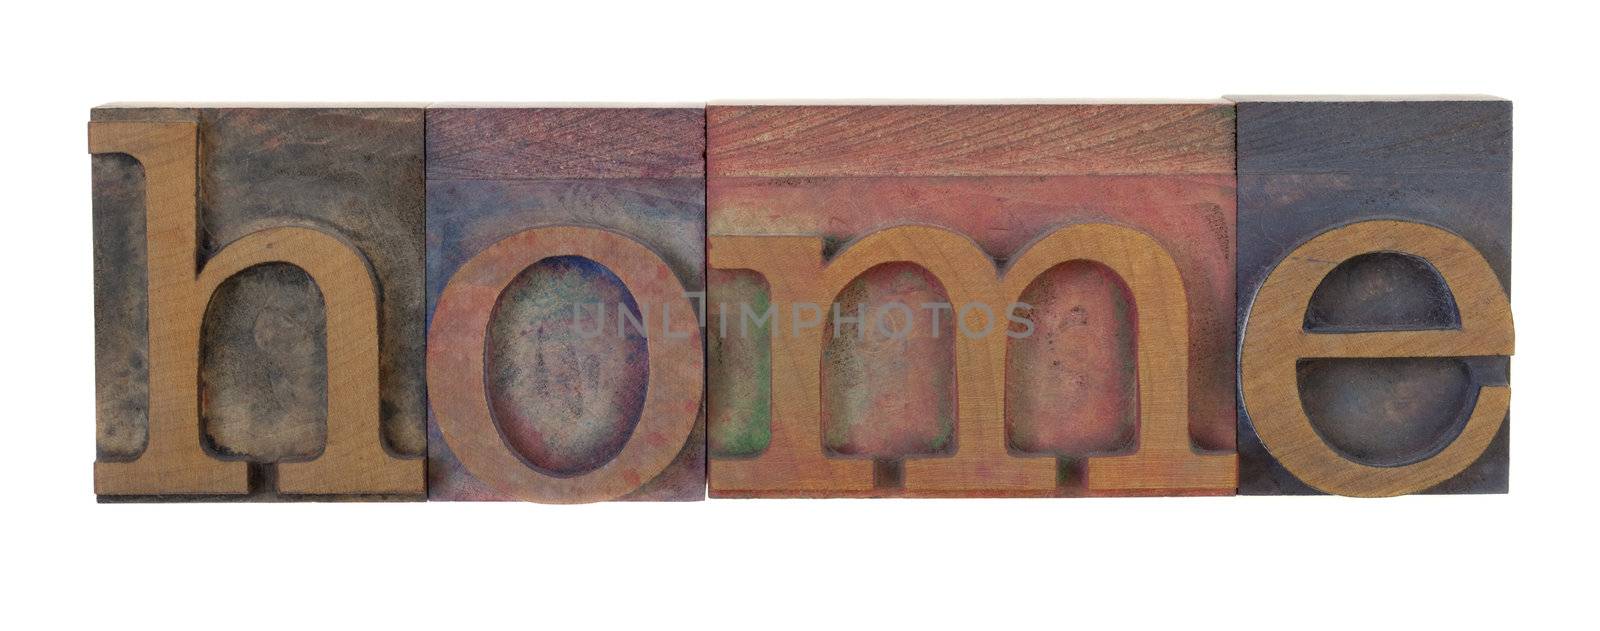 home - word in vintage letterpress printing blocks, stained by color inks, isolated on white